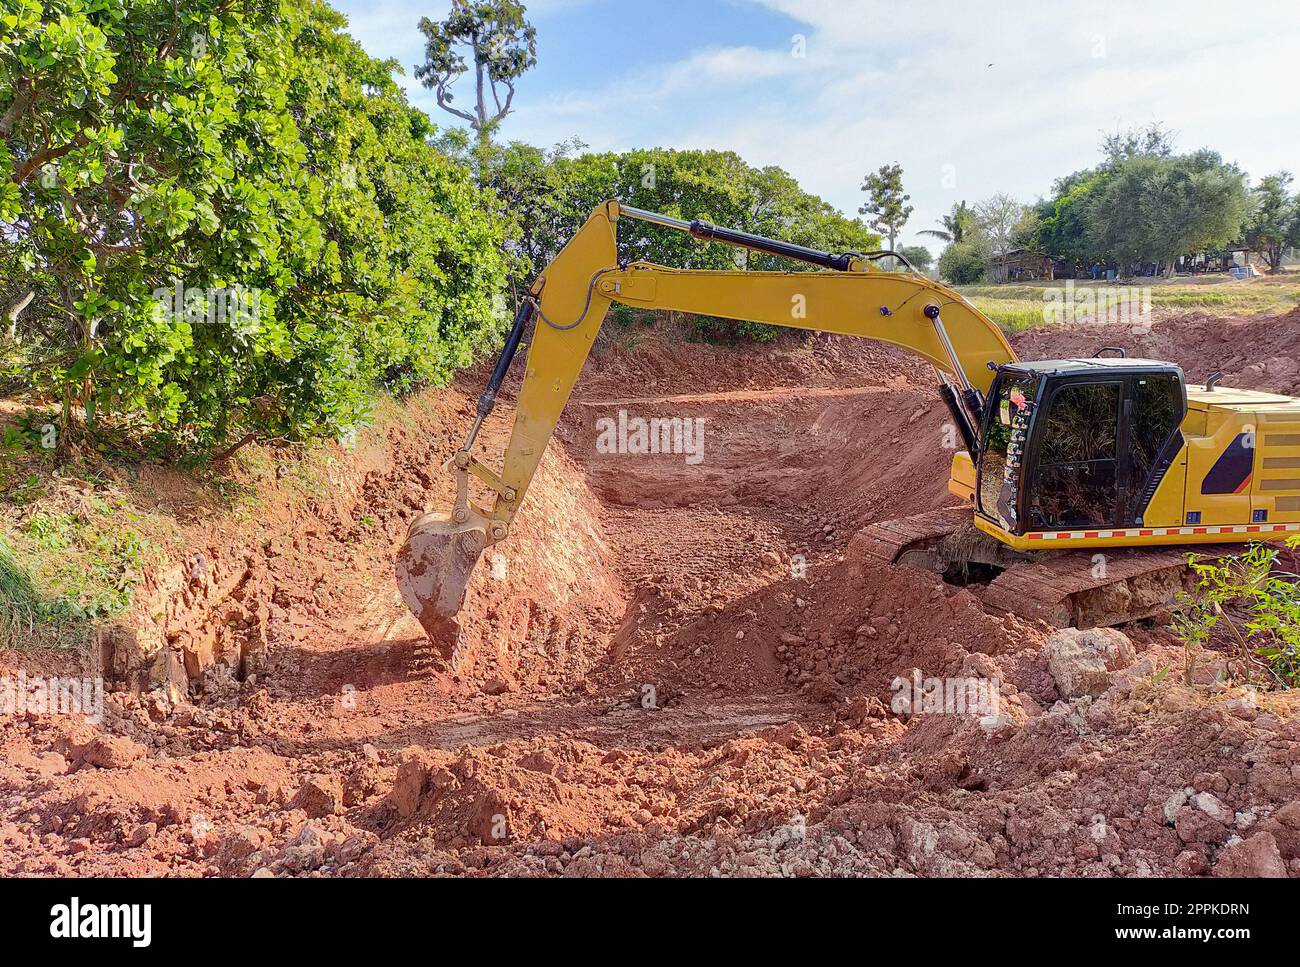 Backhoe bucket digging the soil at agriculture farm to make pond. Crawler excavator digging at shale layer. Excavating machine. Earth moving equipment. Excavation vehicle. Construction business. Stock Photo